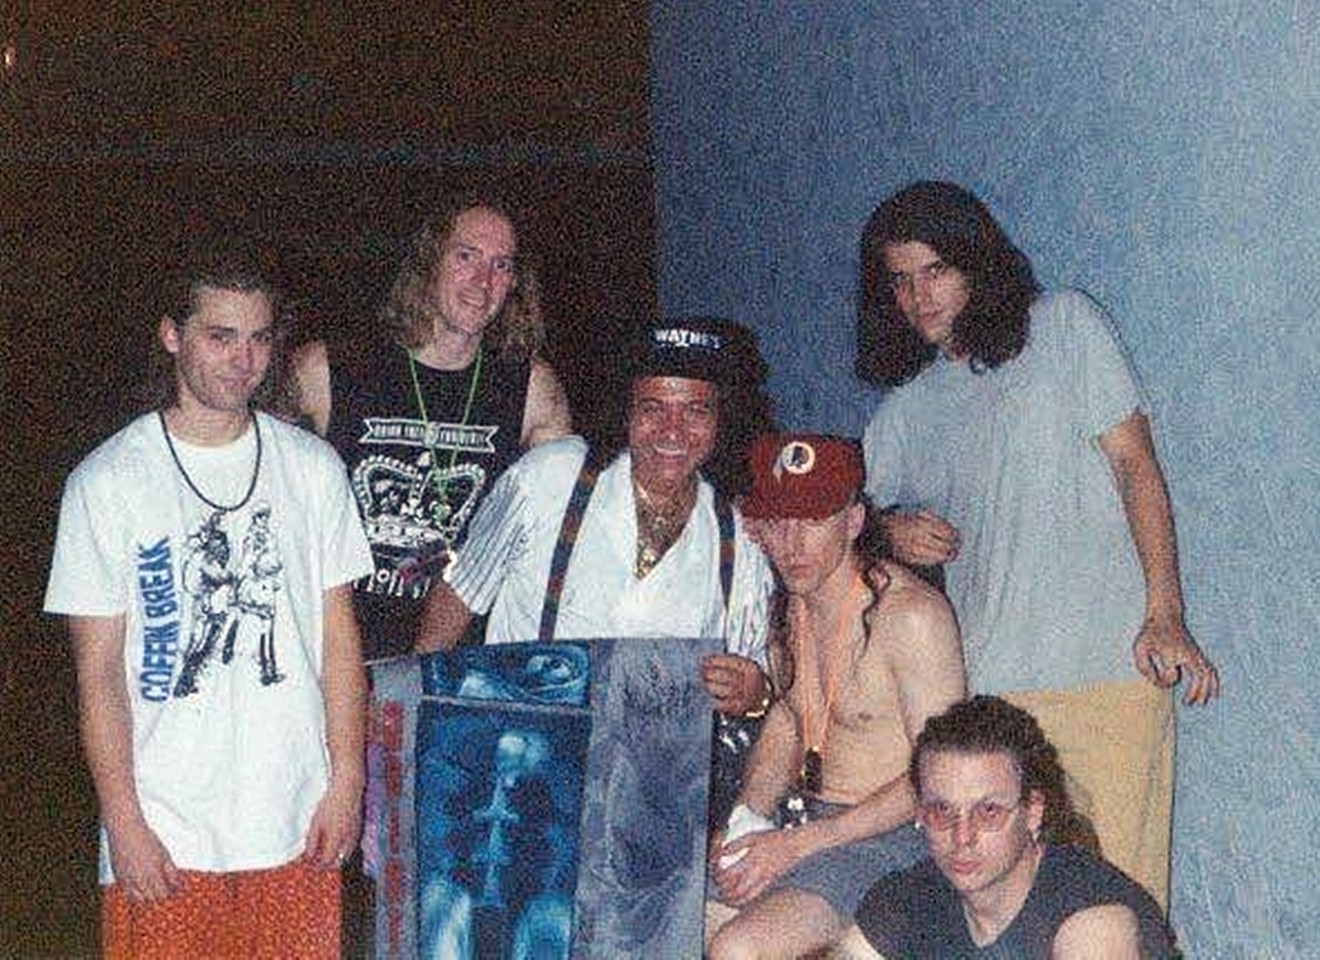 The members of Tool in 1992 outside of The Mason Jar in Phoenix with the venue's then-owner Franco Gagliano (center).